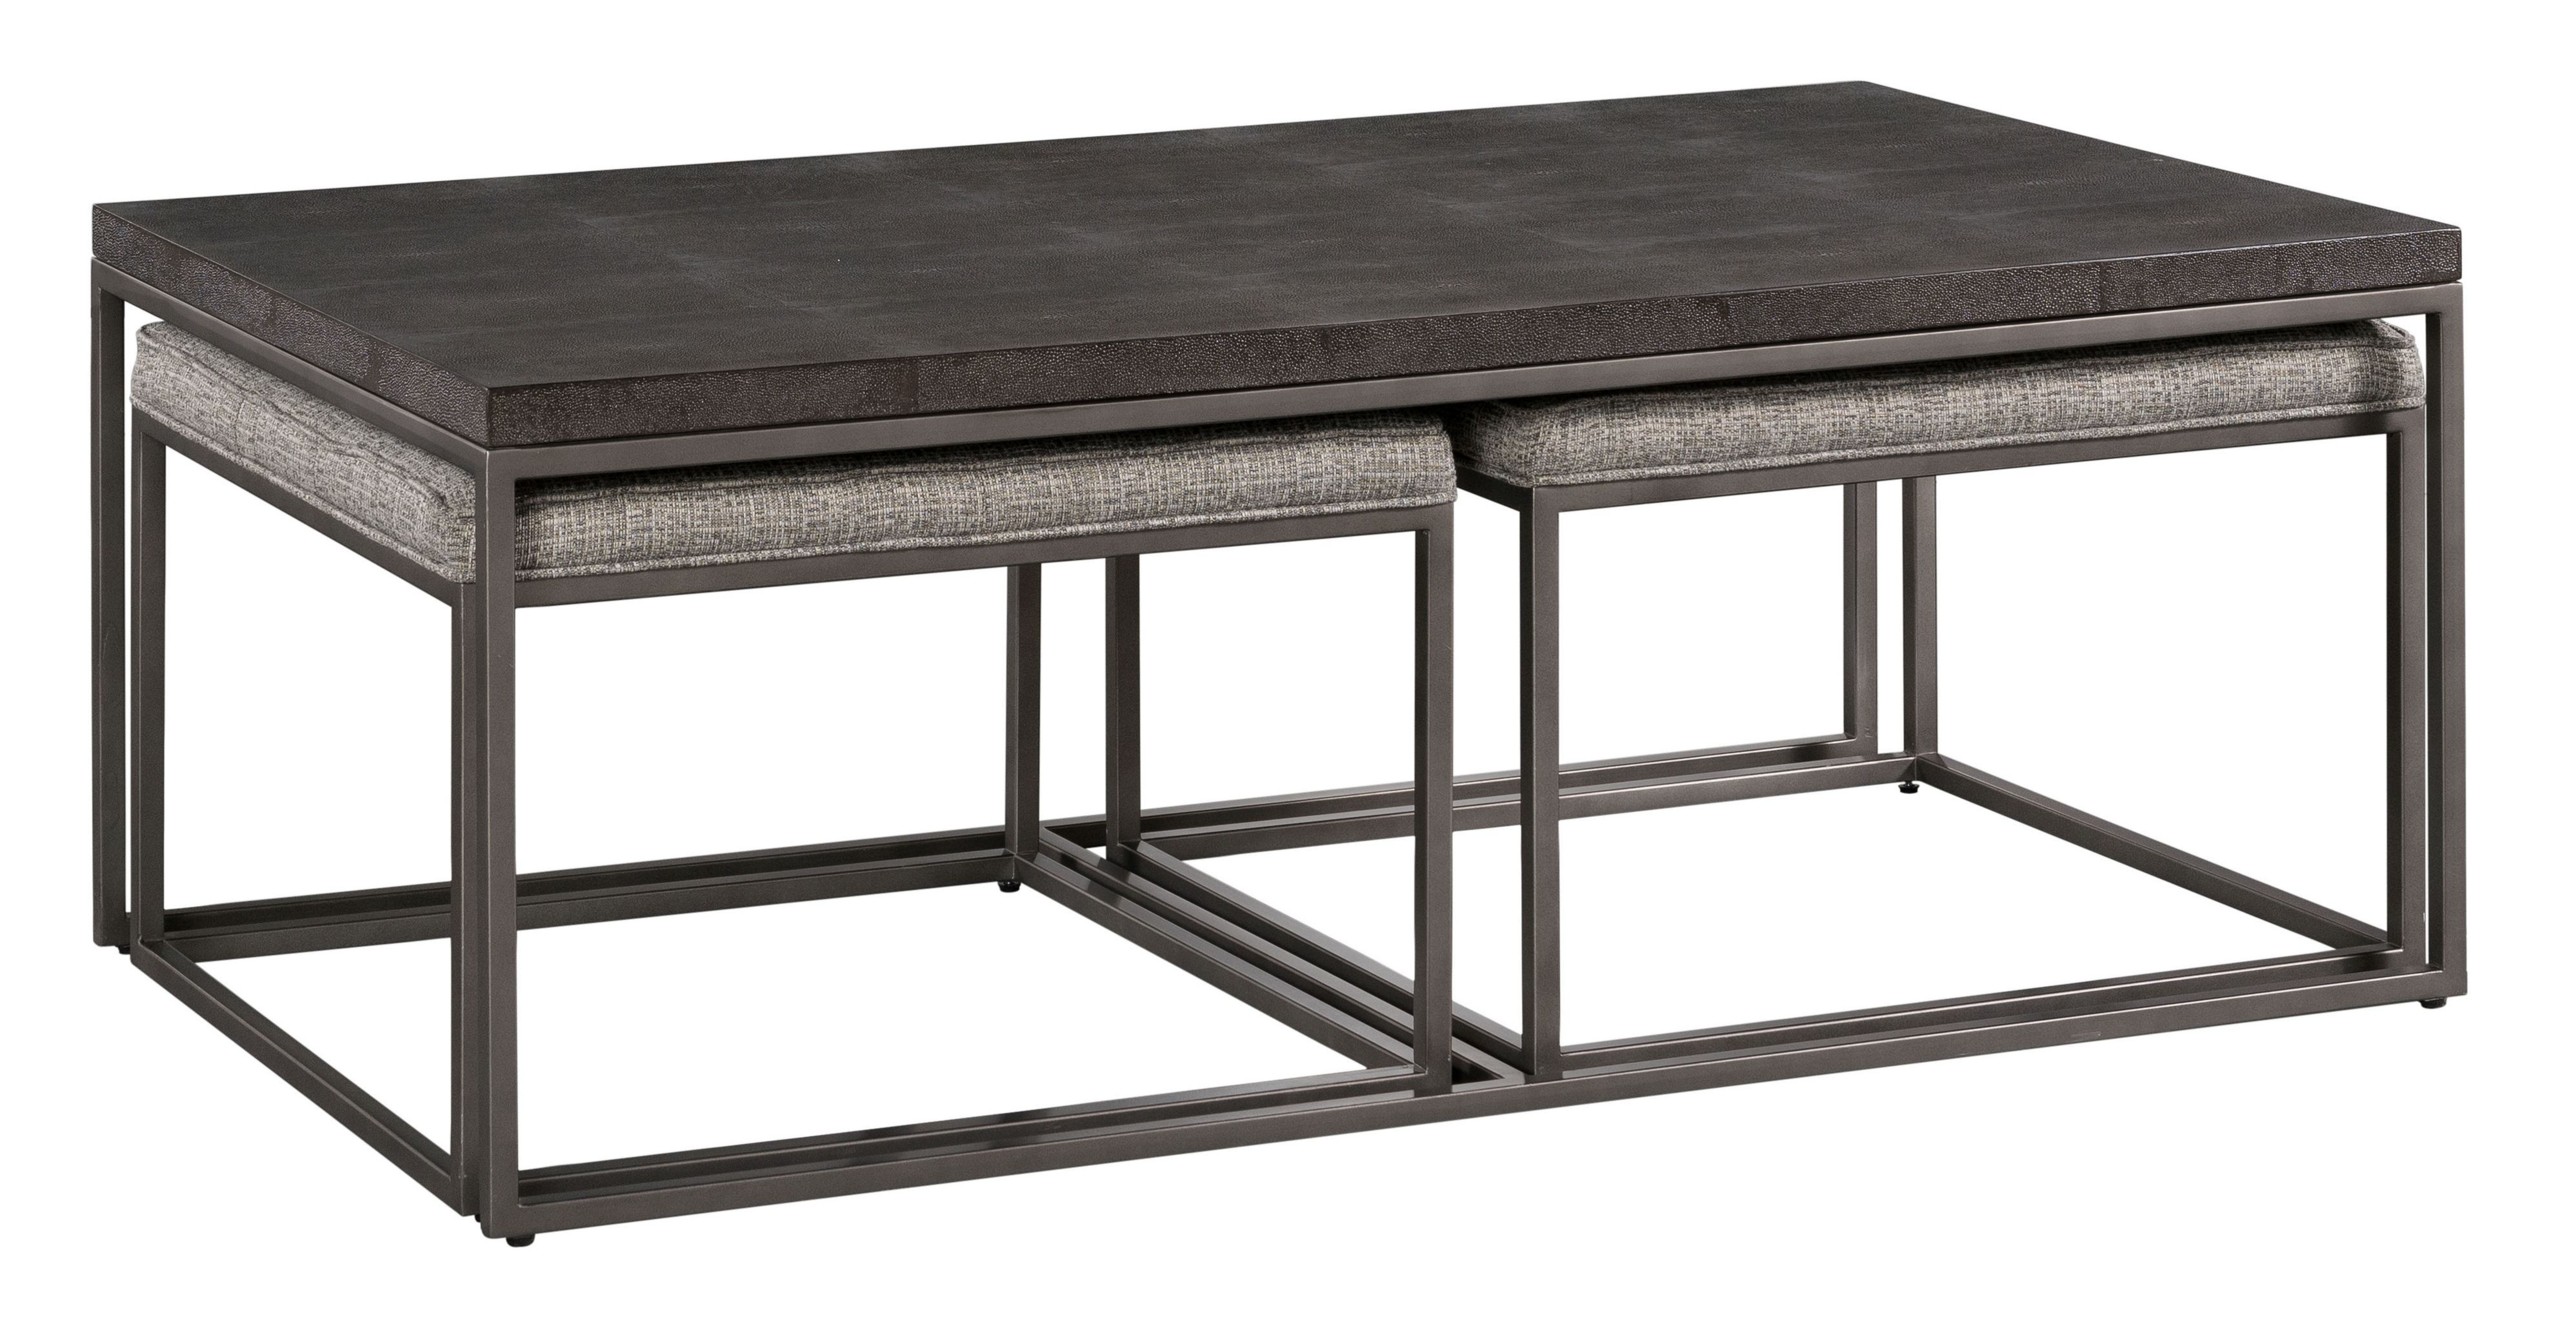 Lane furniture charcoal wood gunmetal cocktail table with